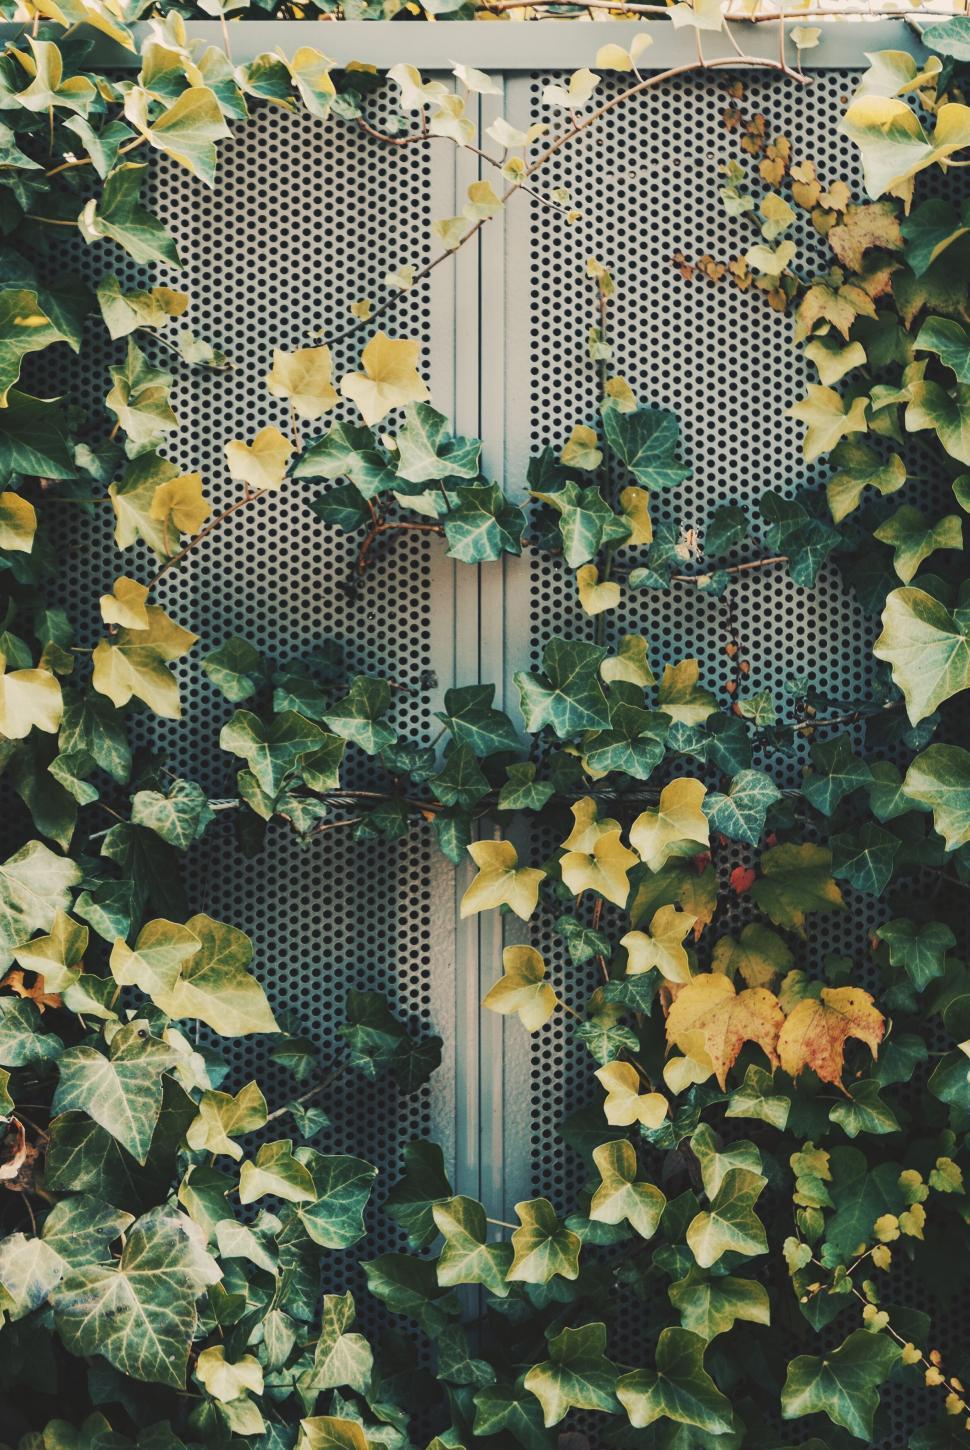 Free Image of Ivy-covered metallic gate in sunlight 